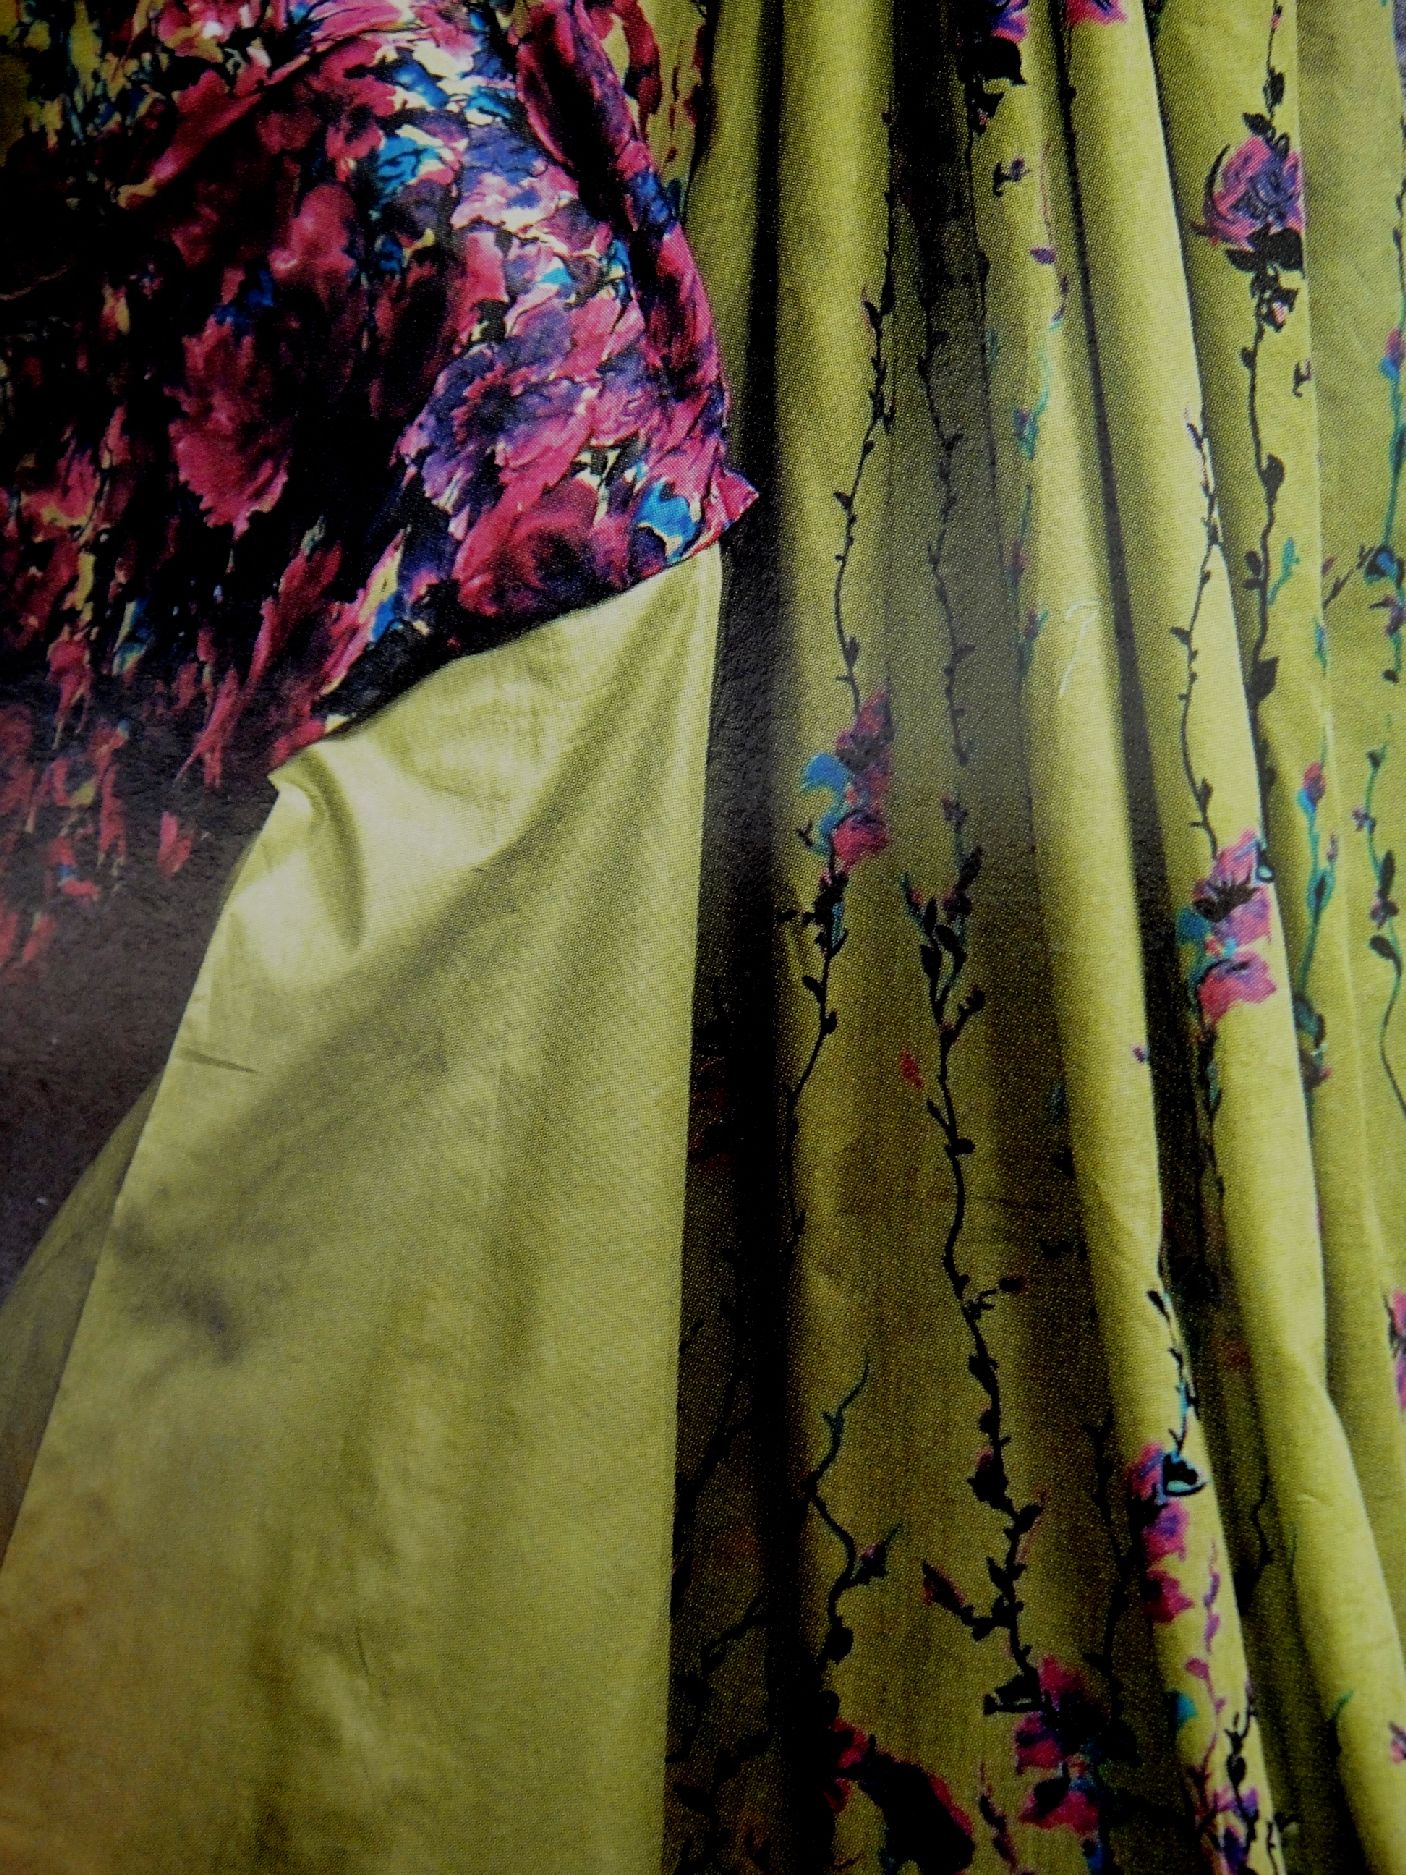 Free photo: Fabric colour full design - Abstract, Lining, Texture ...